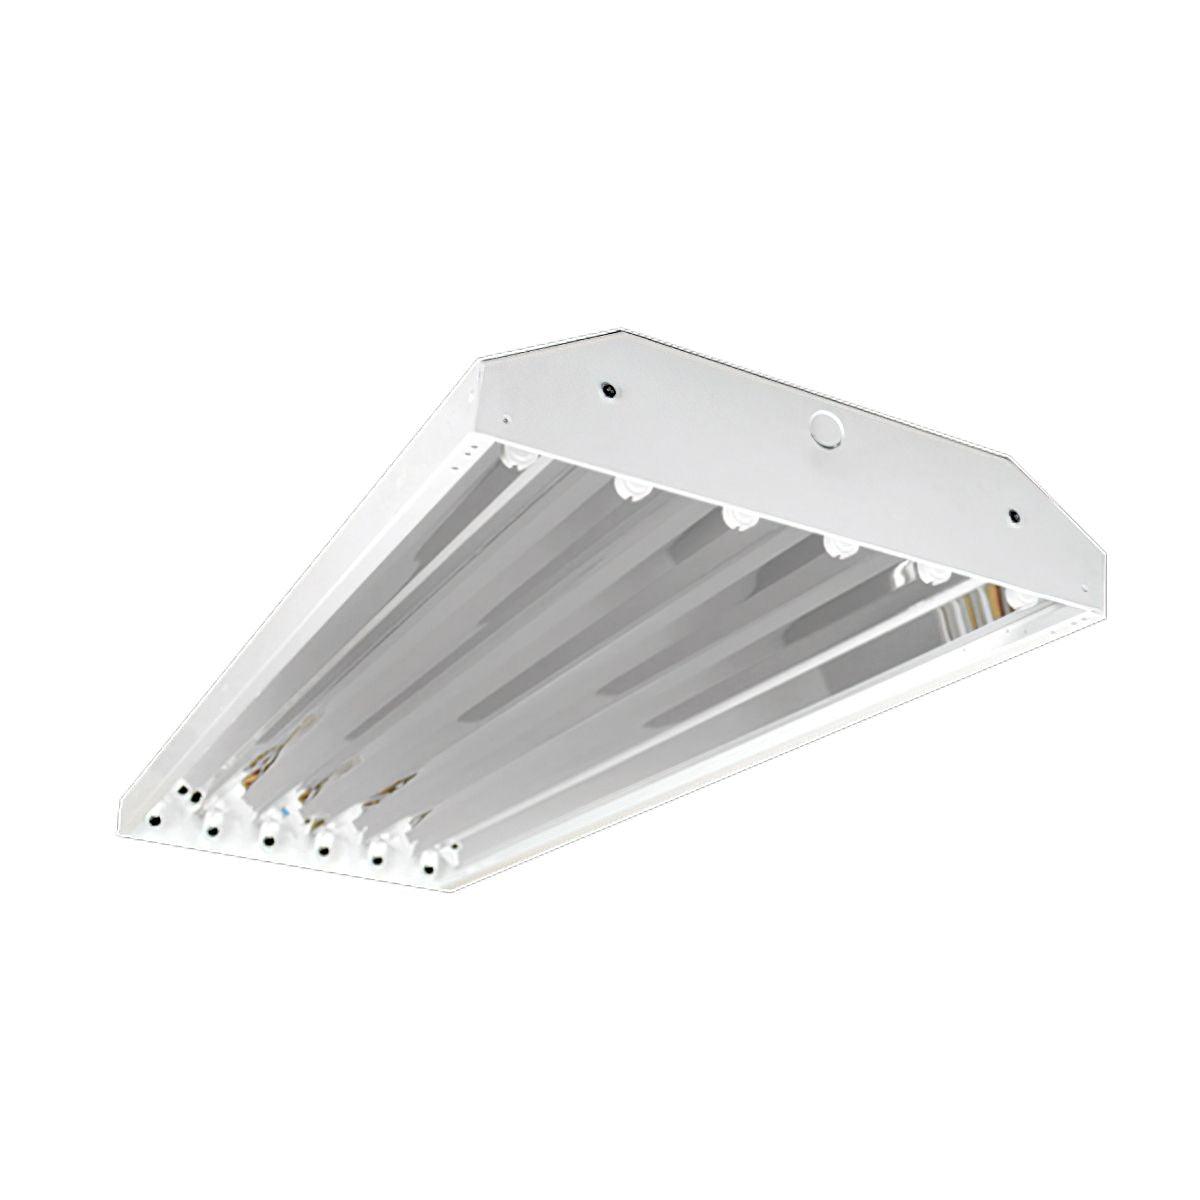 4ft LED Ready High Bay, 6 lamp Single End Wiring, T8 Bulbs Not Included - Bees Lighting